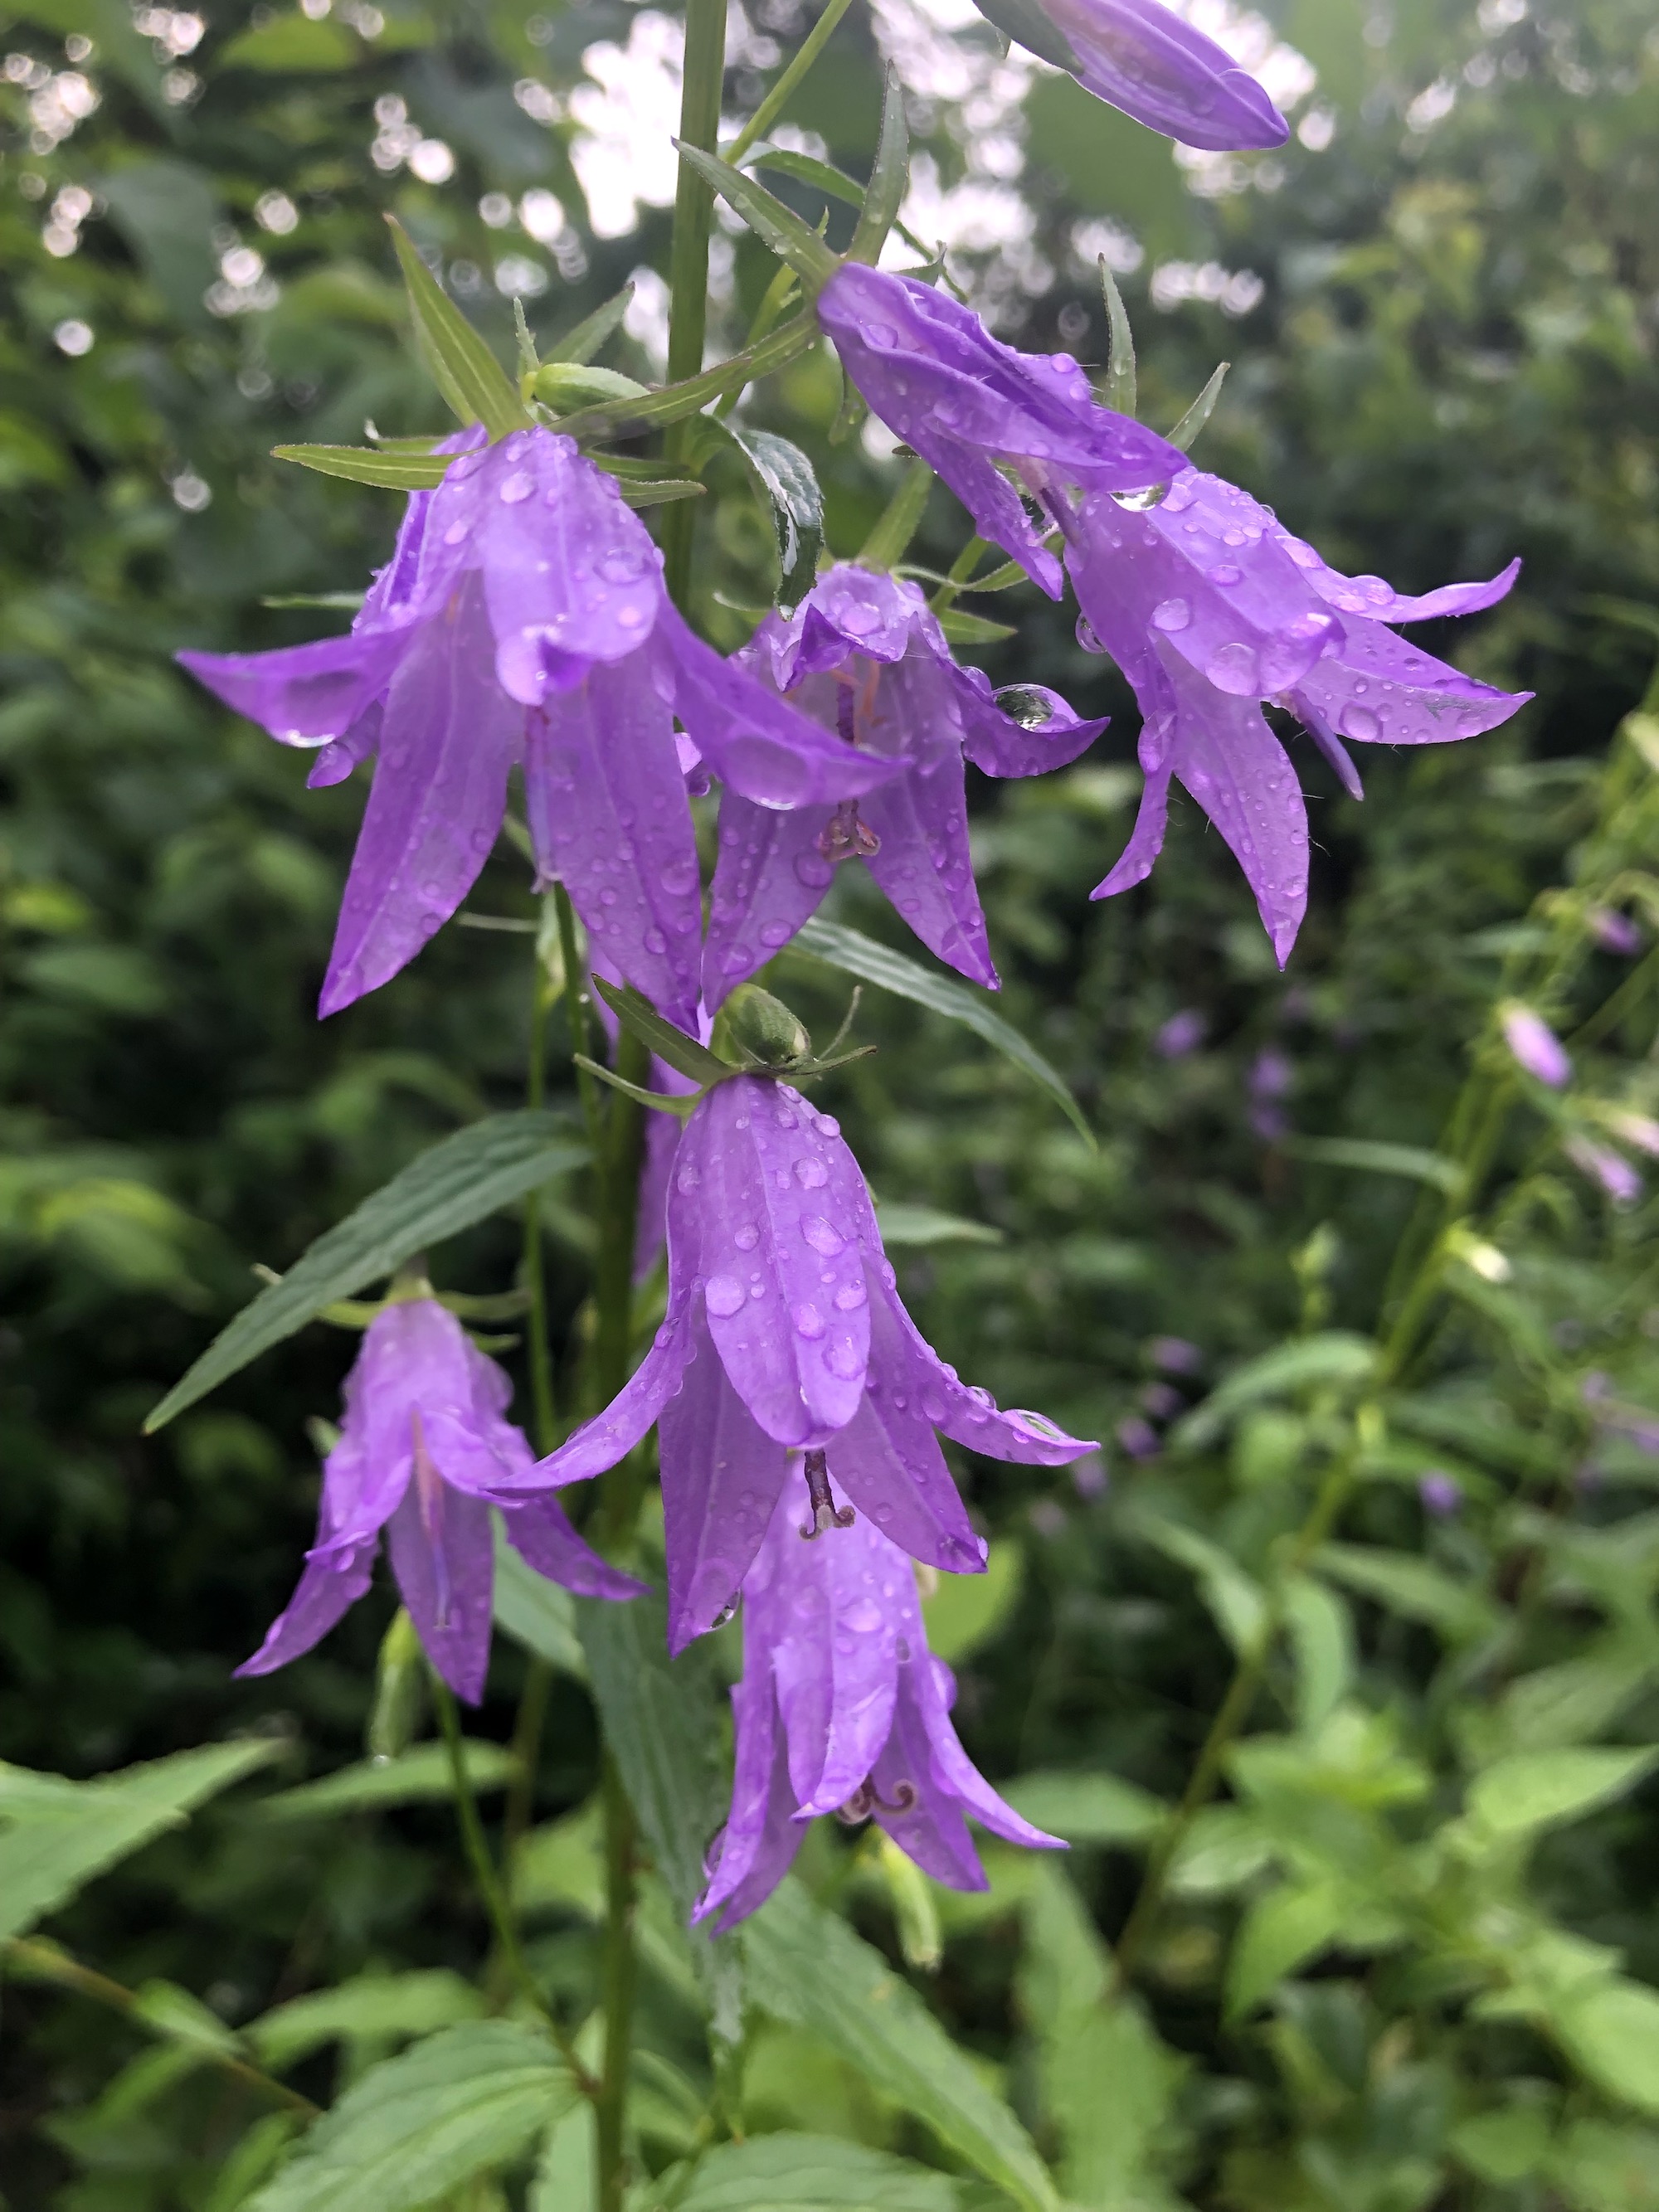 Creeping Bellflower by home in Madison, Wisconsin on July 6, 2019.